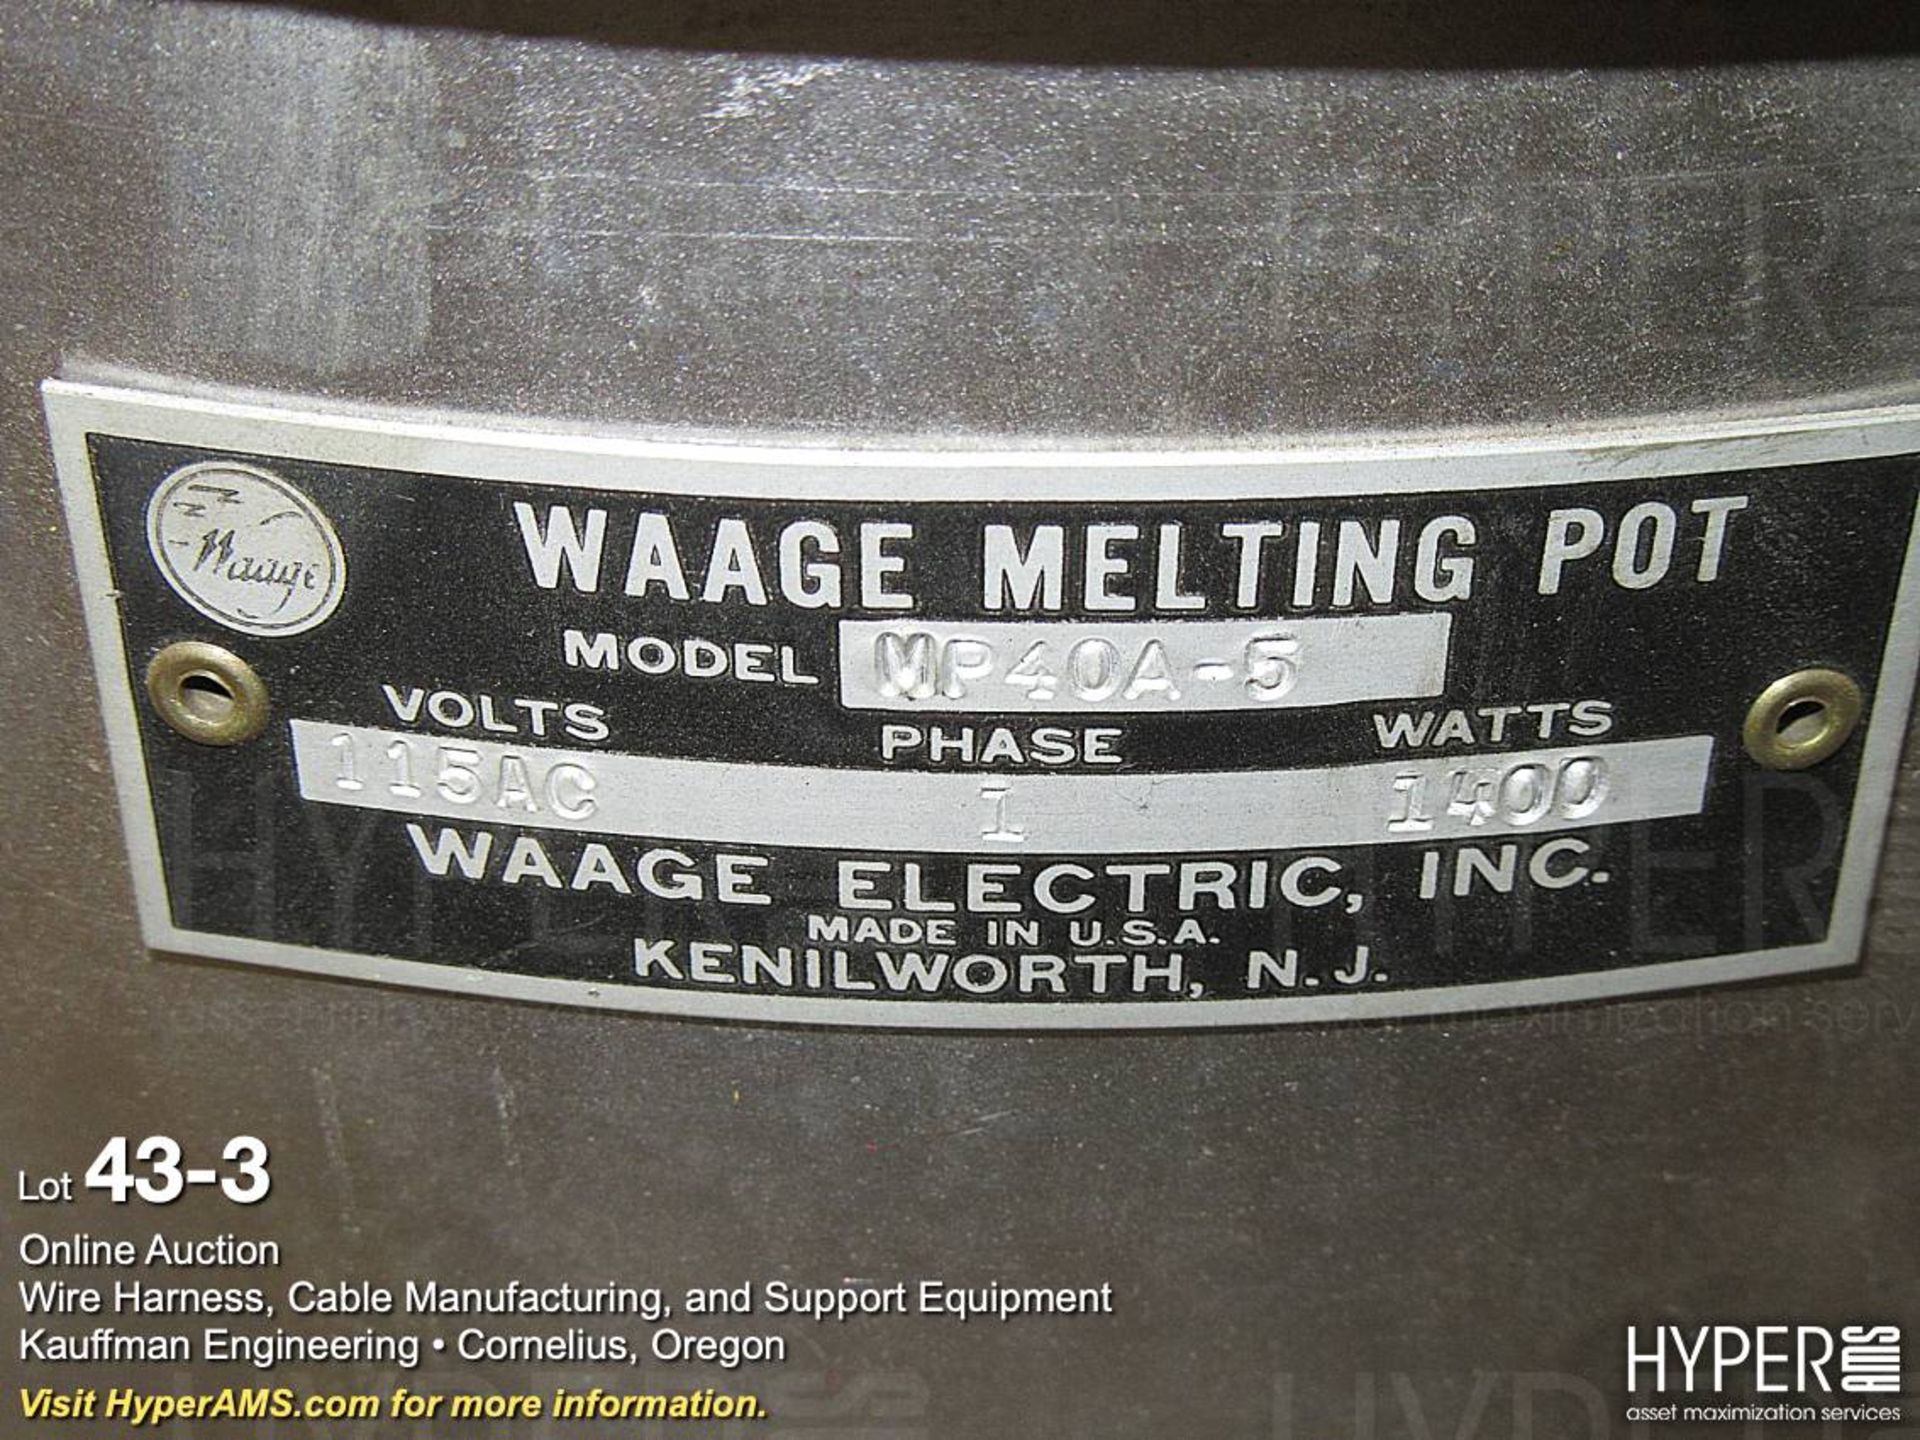 Waage Electric MP40A-5 melting pot - Image 3 of 3